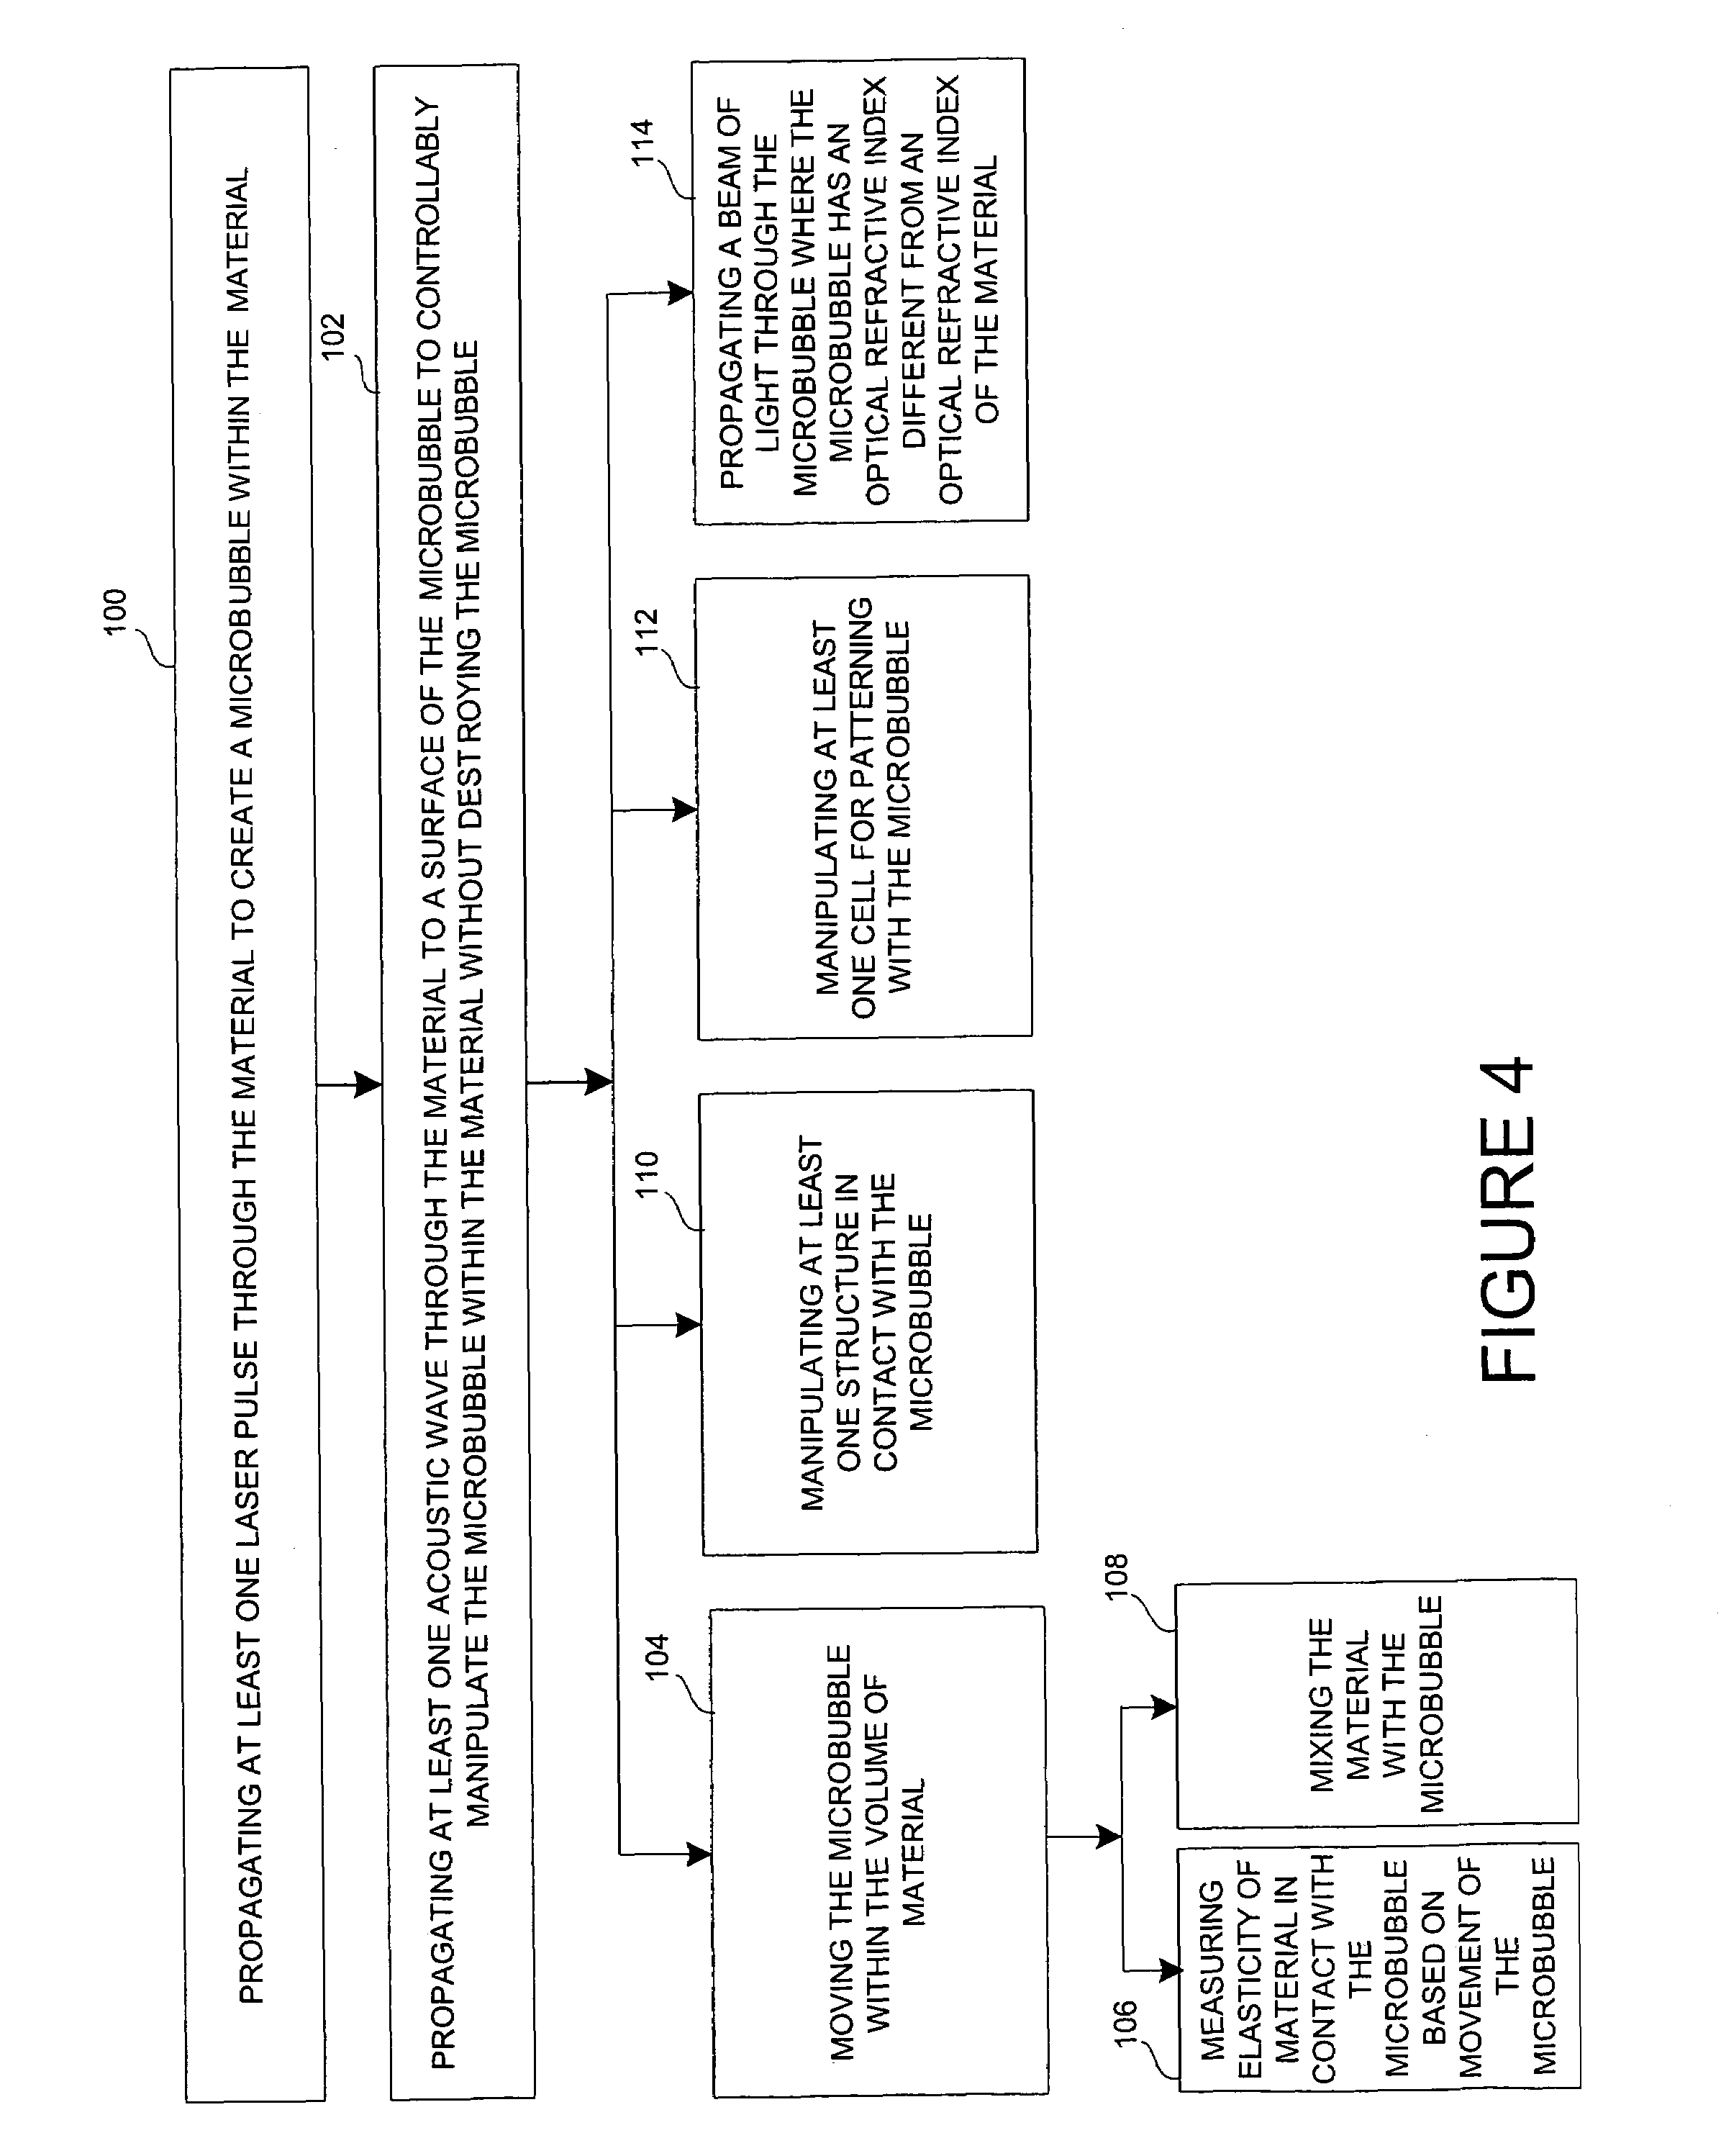 Method and system to create and acoustically manipulate a microbubble